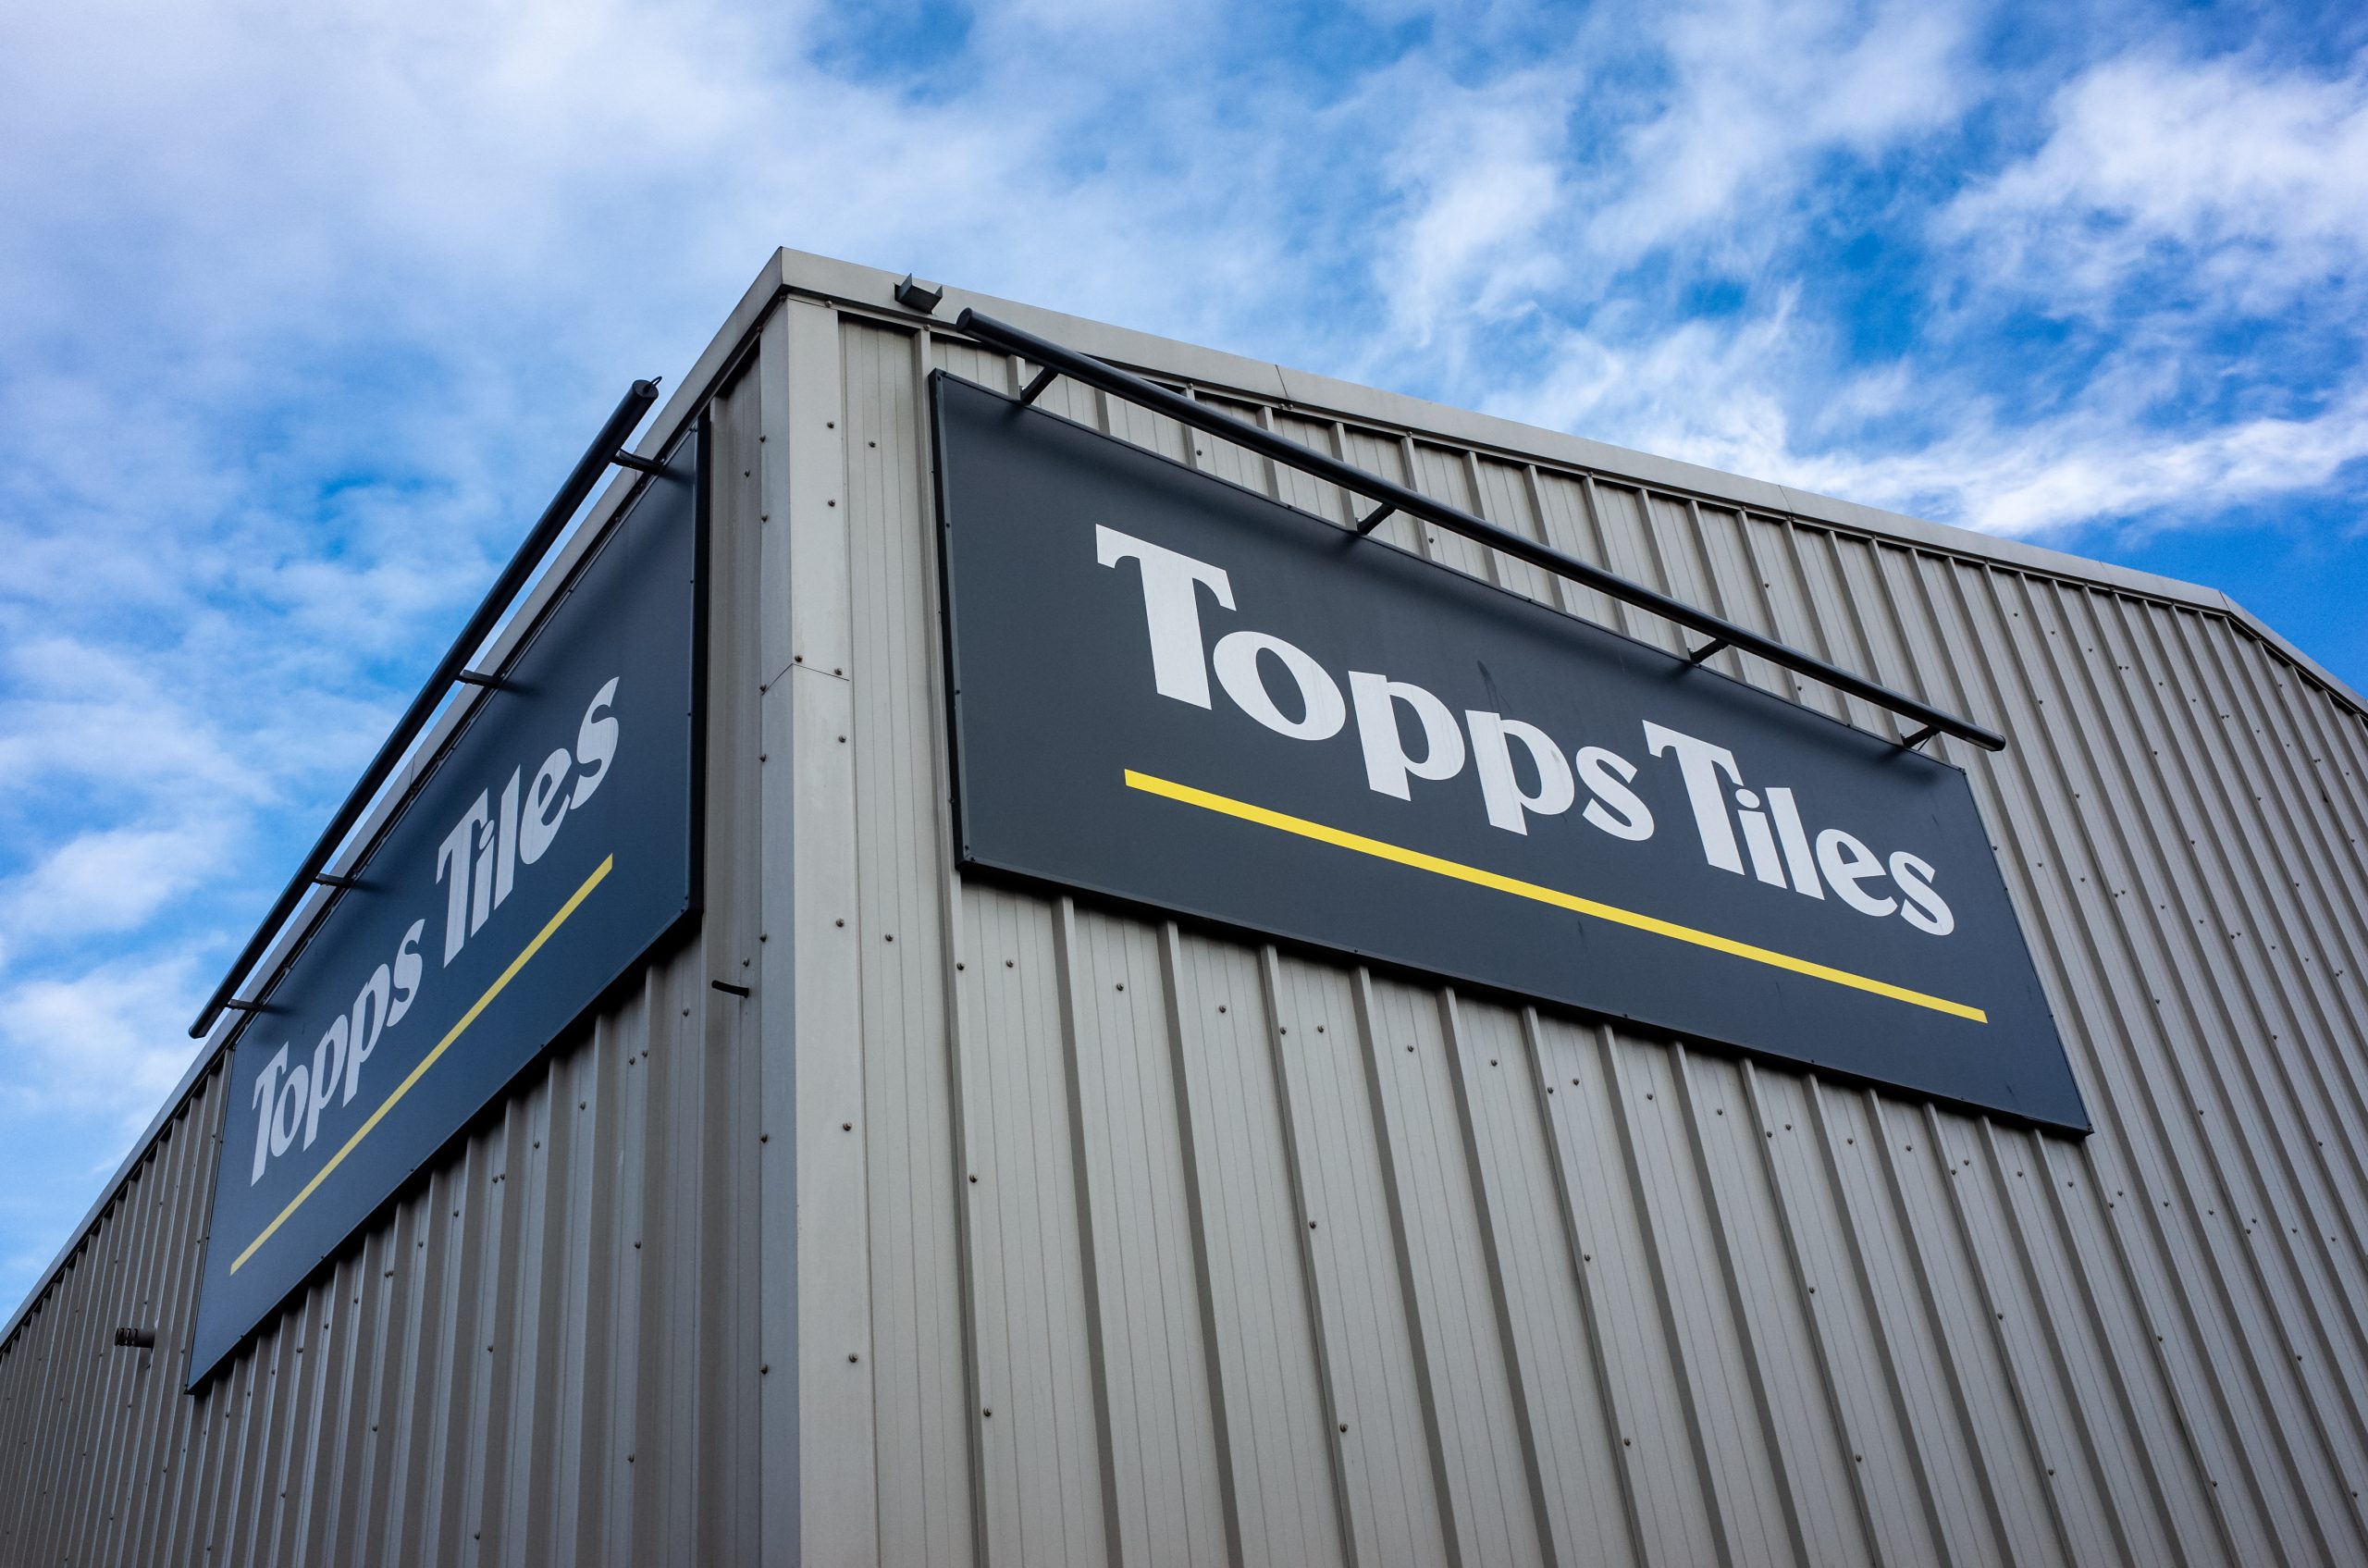 Topps Tiles had said it expects annual gross margins to be "moderately lower" compared with last year, as it battles costs.